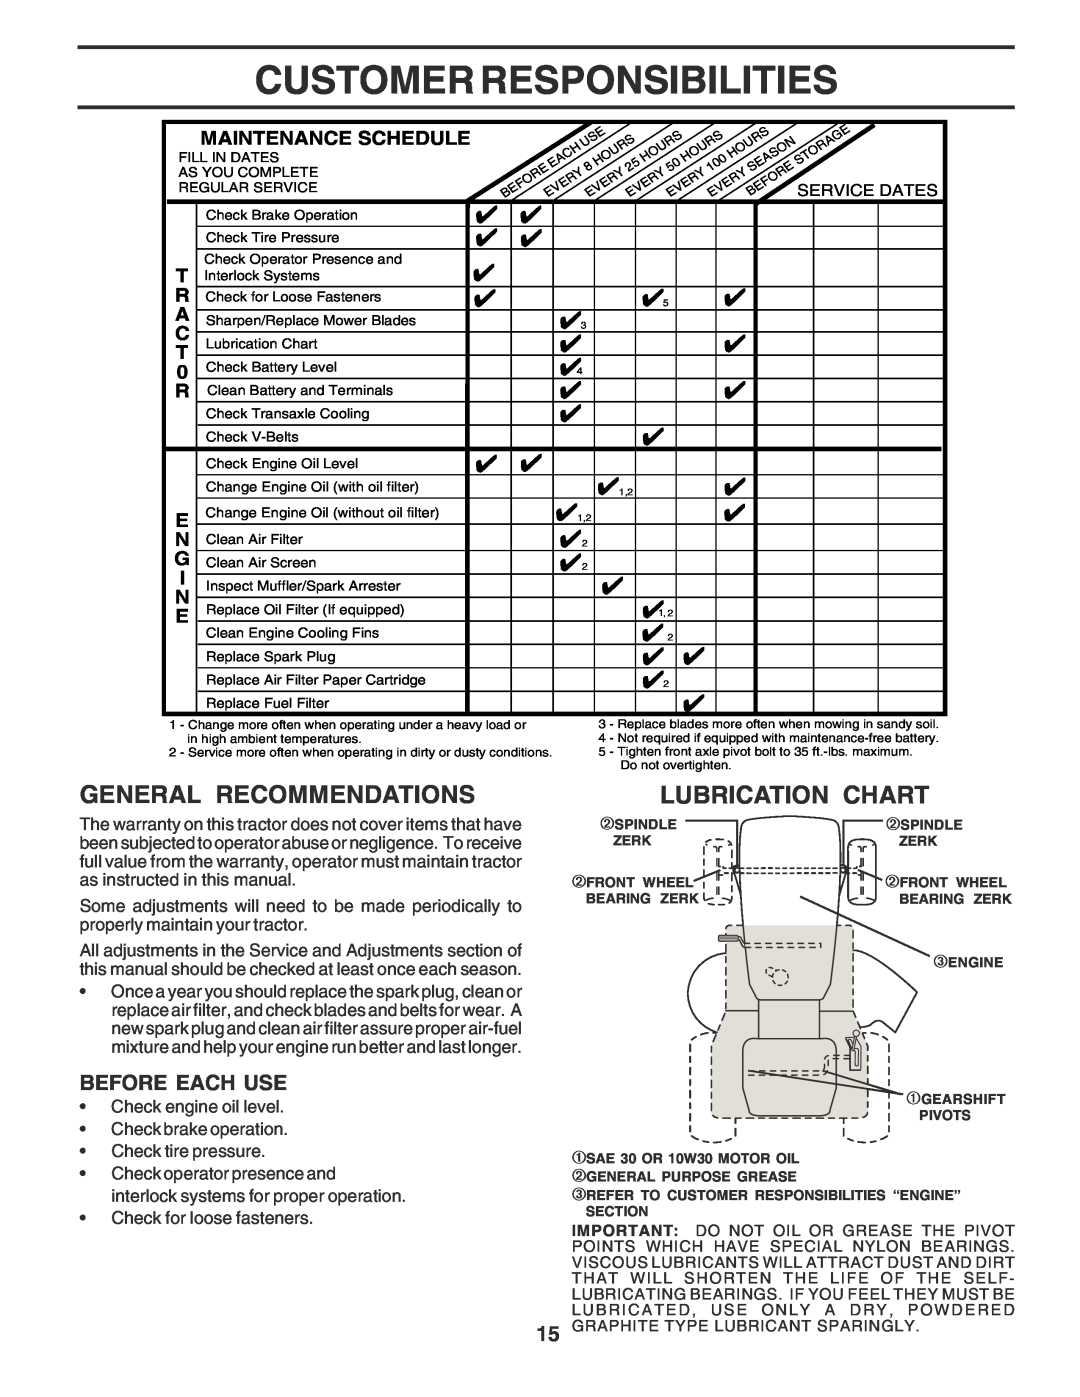 Poulan 183368 owner manual Customer Responsibilities, General Recommendations, Lubrication Chart, Before Each Use 